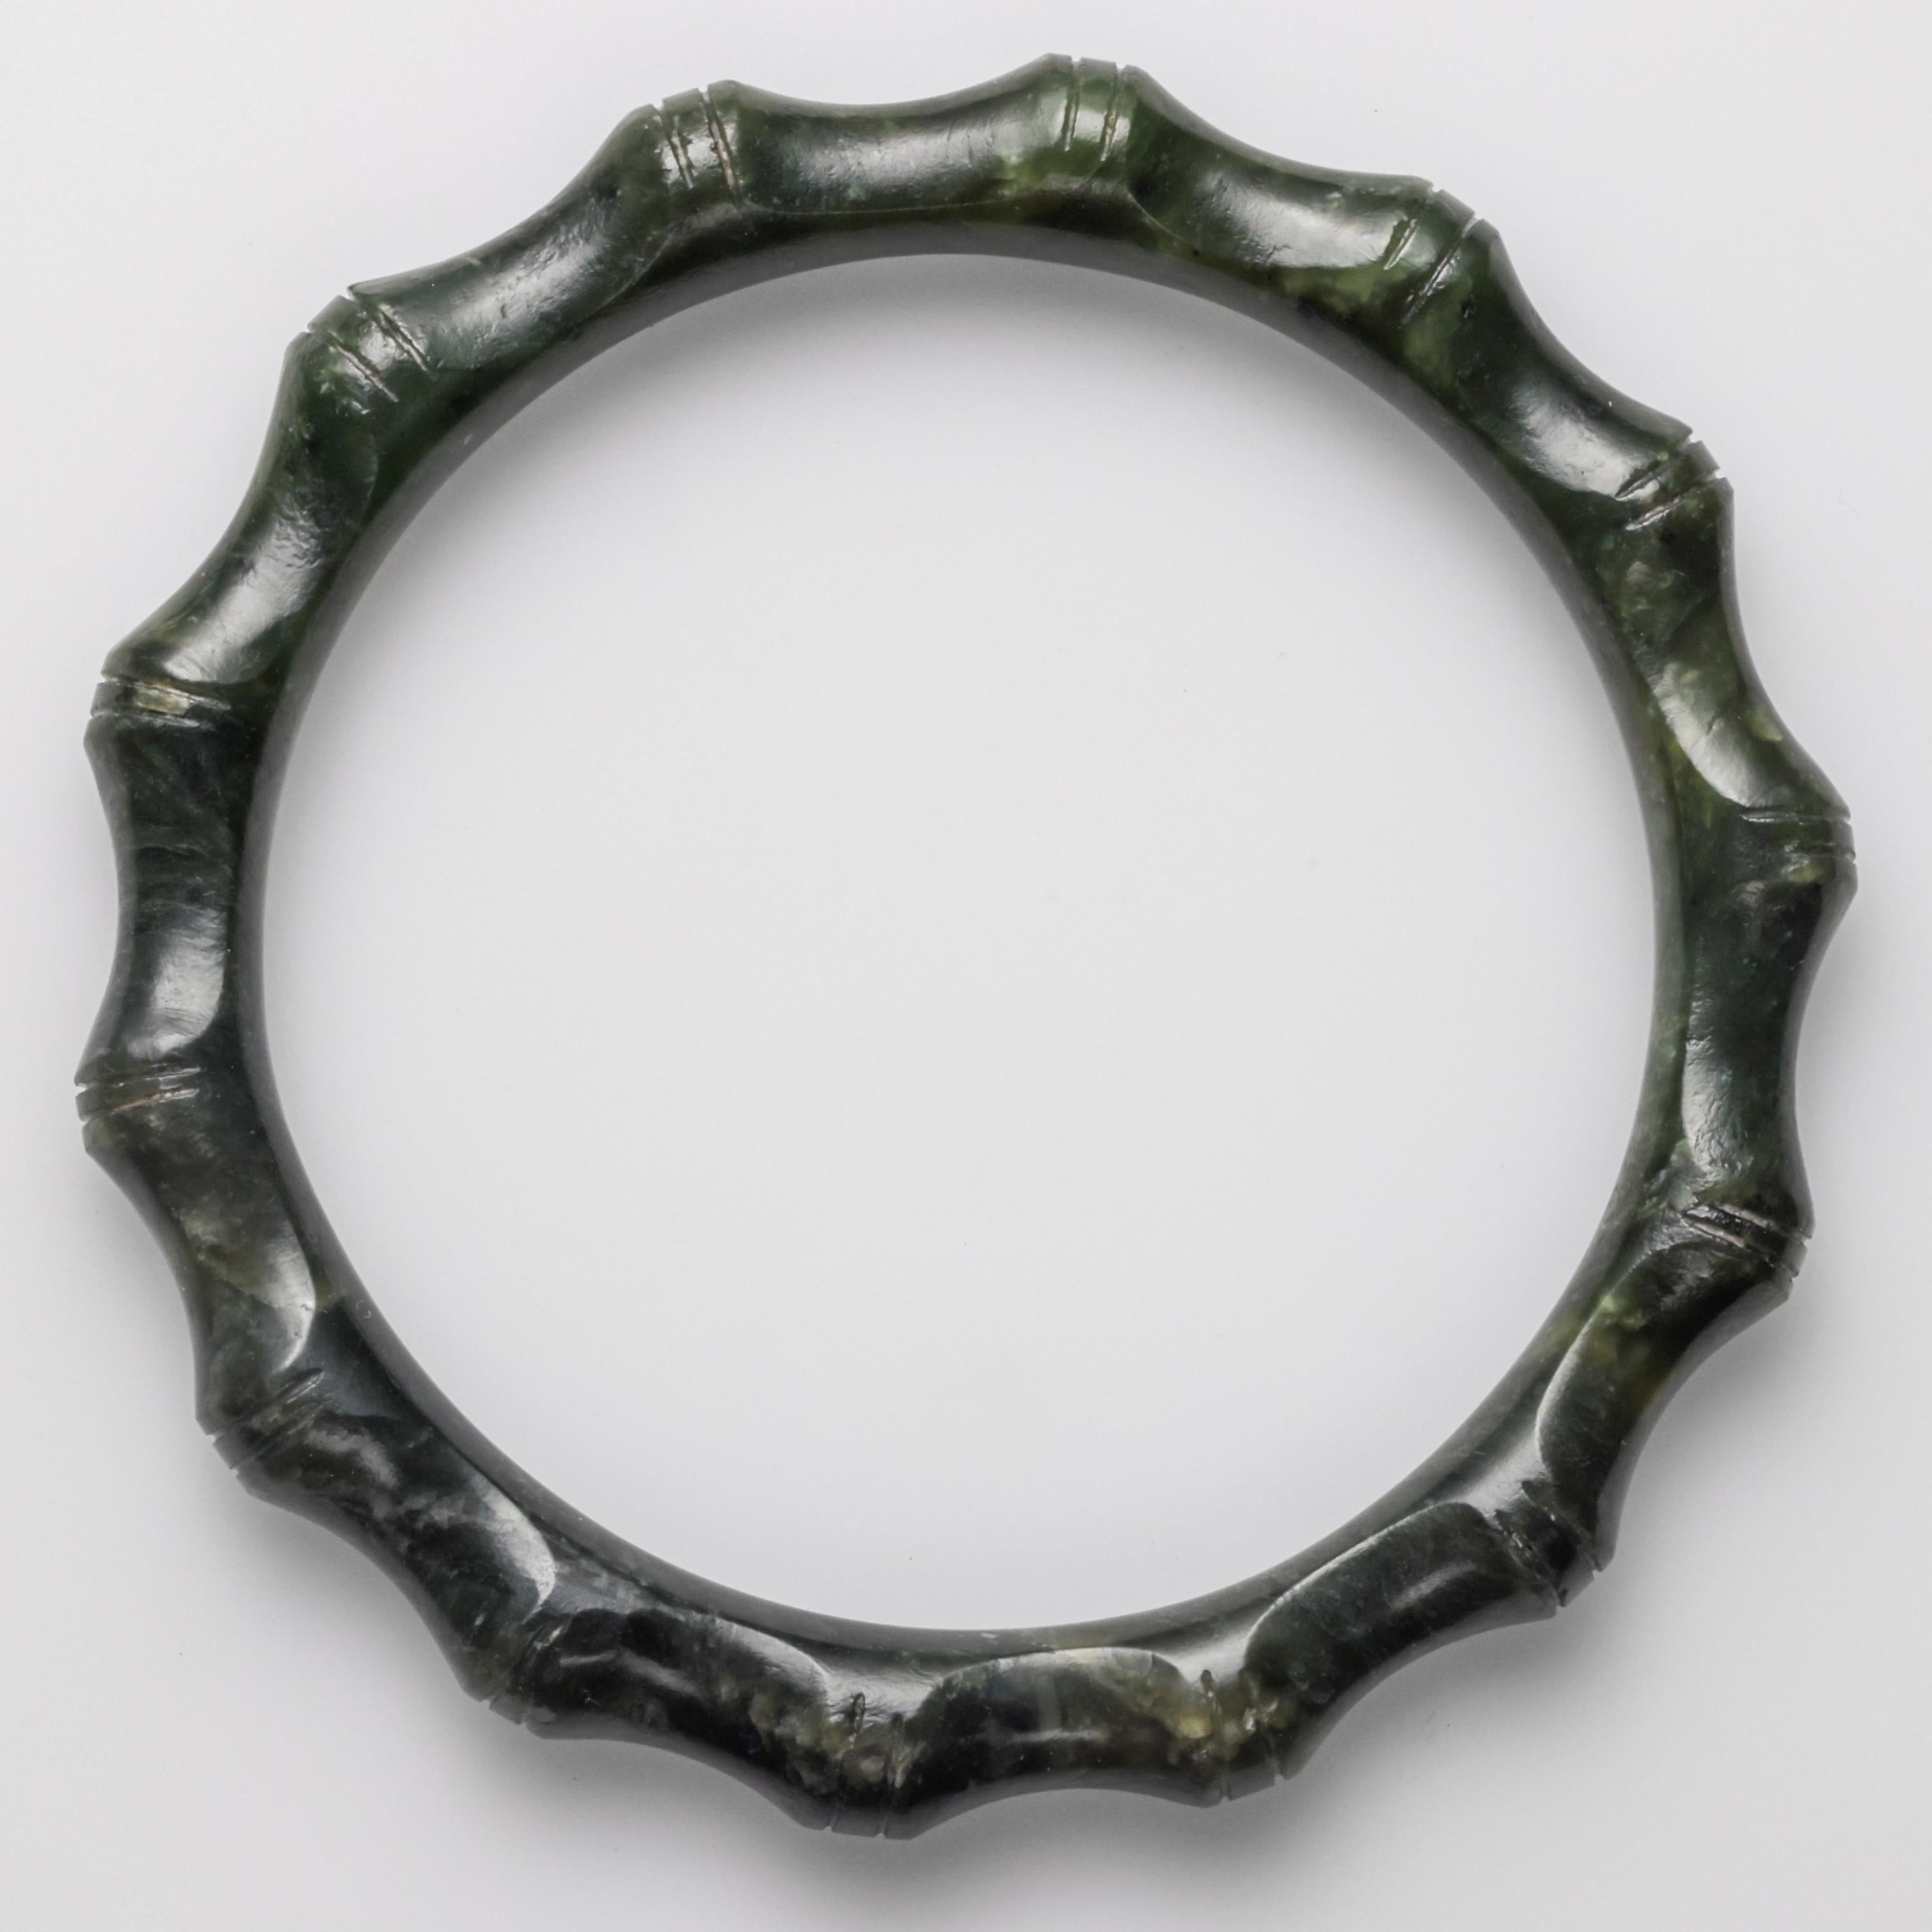 This deep green nephrite jade bangle was hand-carved in the early 1950s to resemble segmented bamboo. It displays the pre-industrial revolution polish of that era, before electric tools and diamond polishing compounds were in wide usage in China.